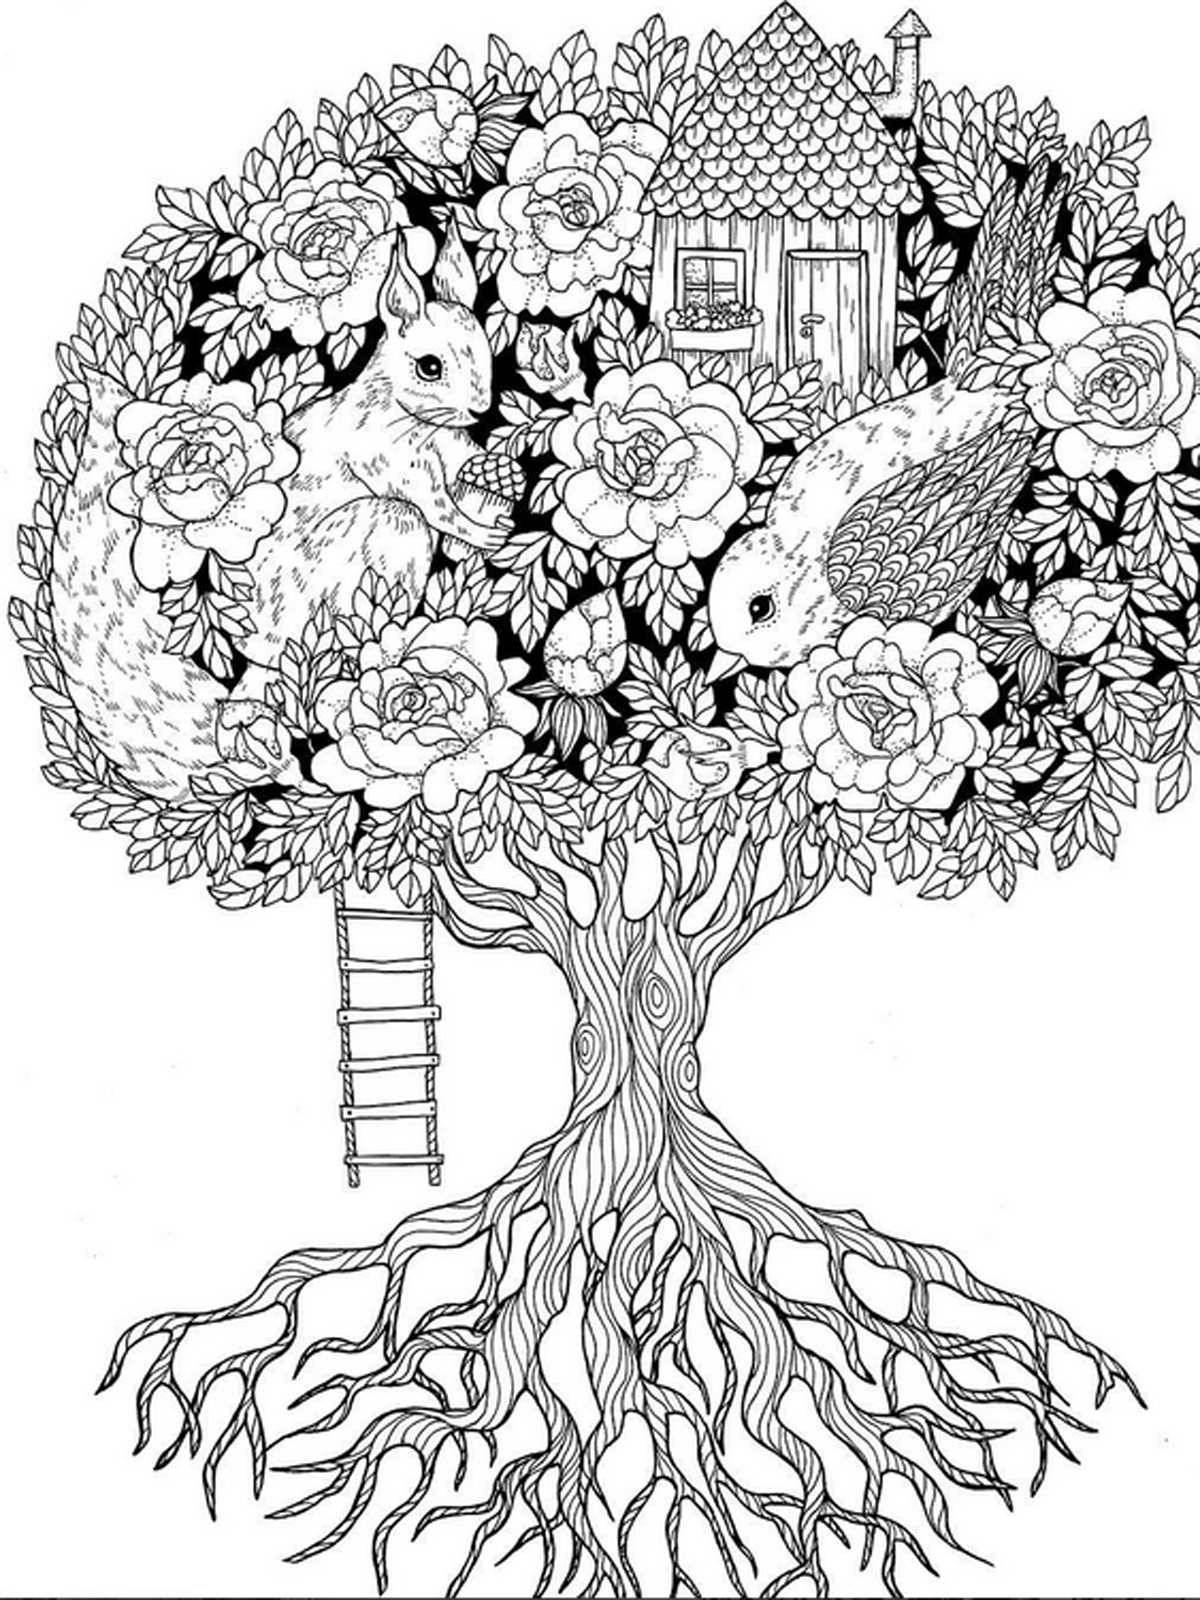 Green tree coloring book